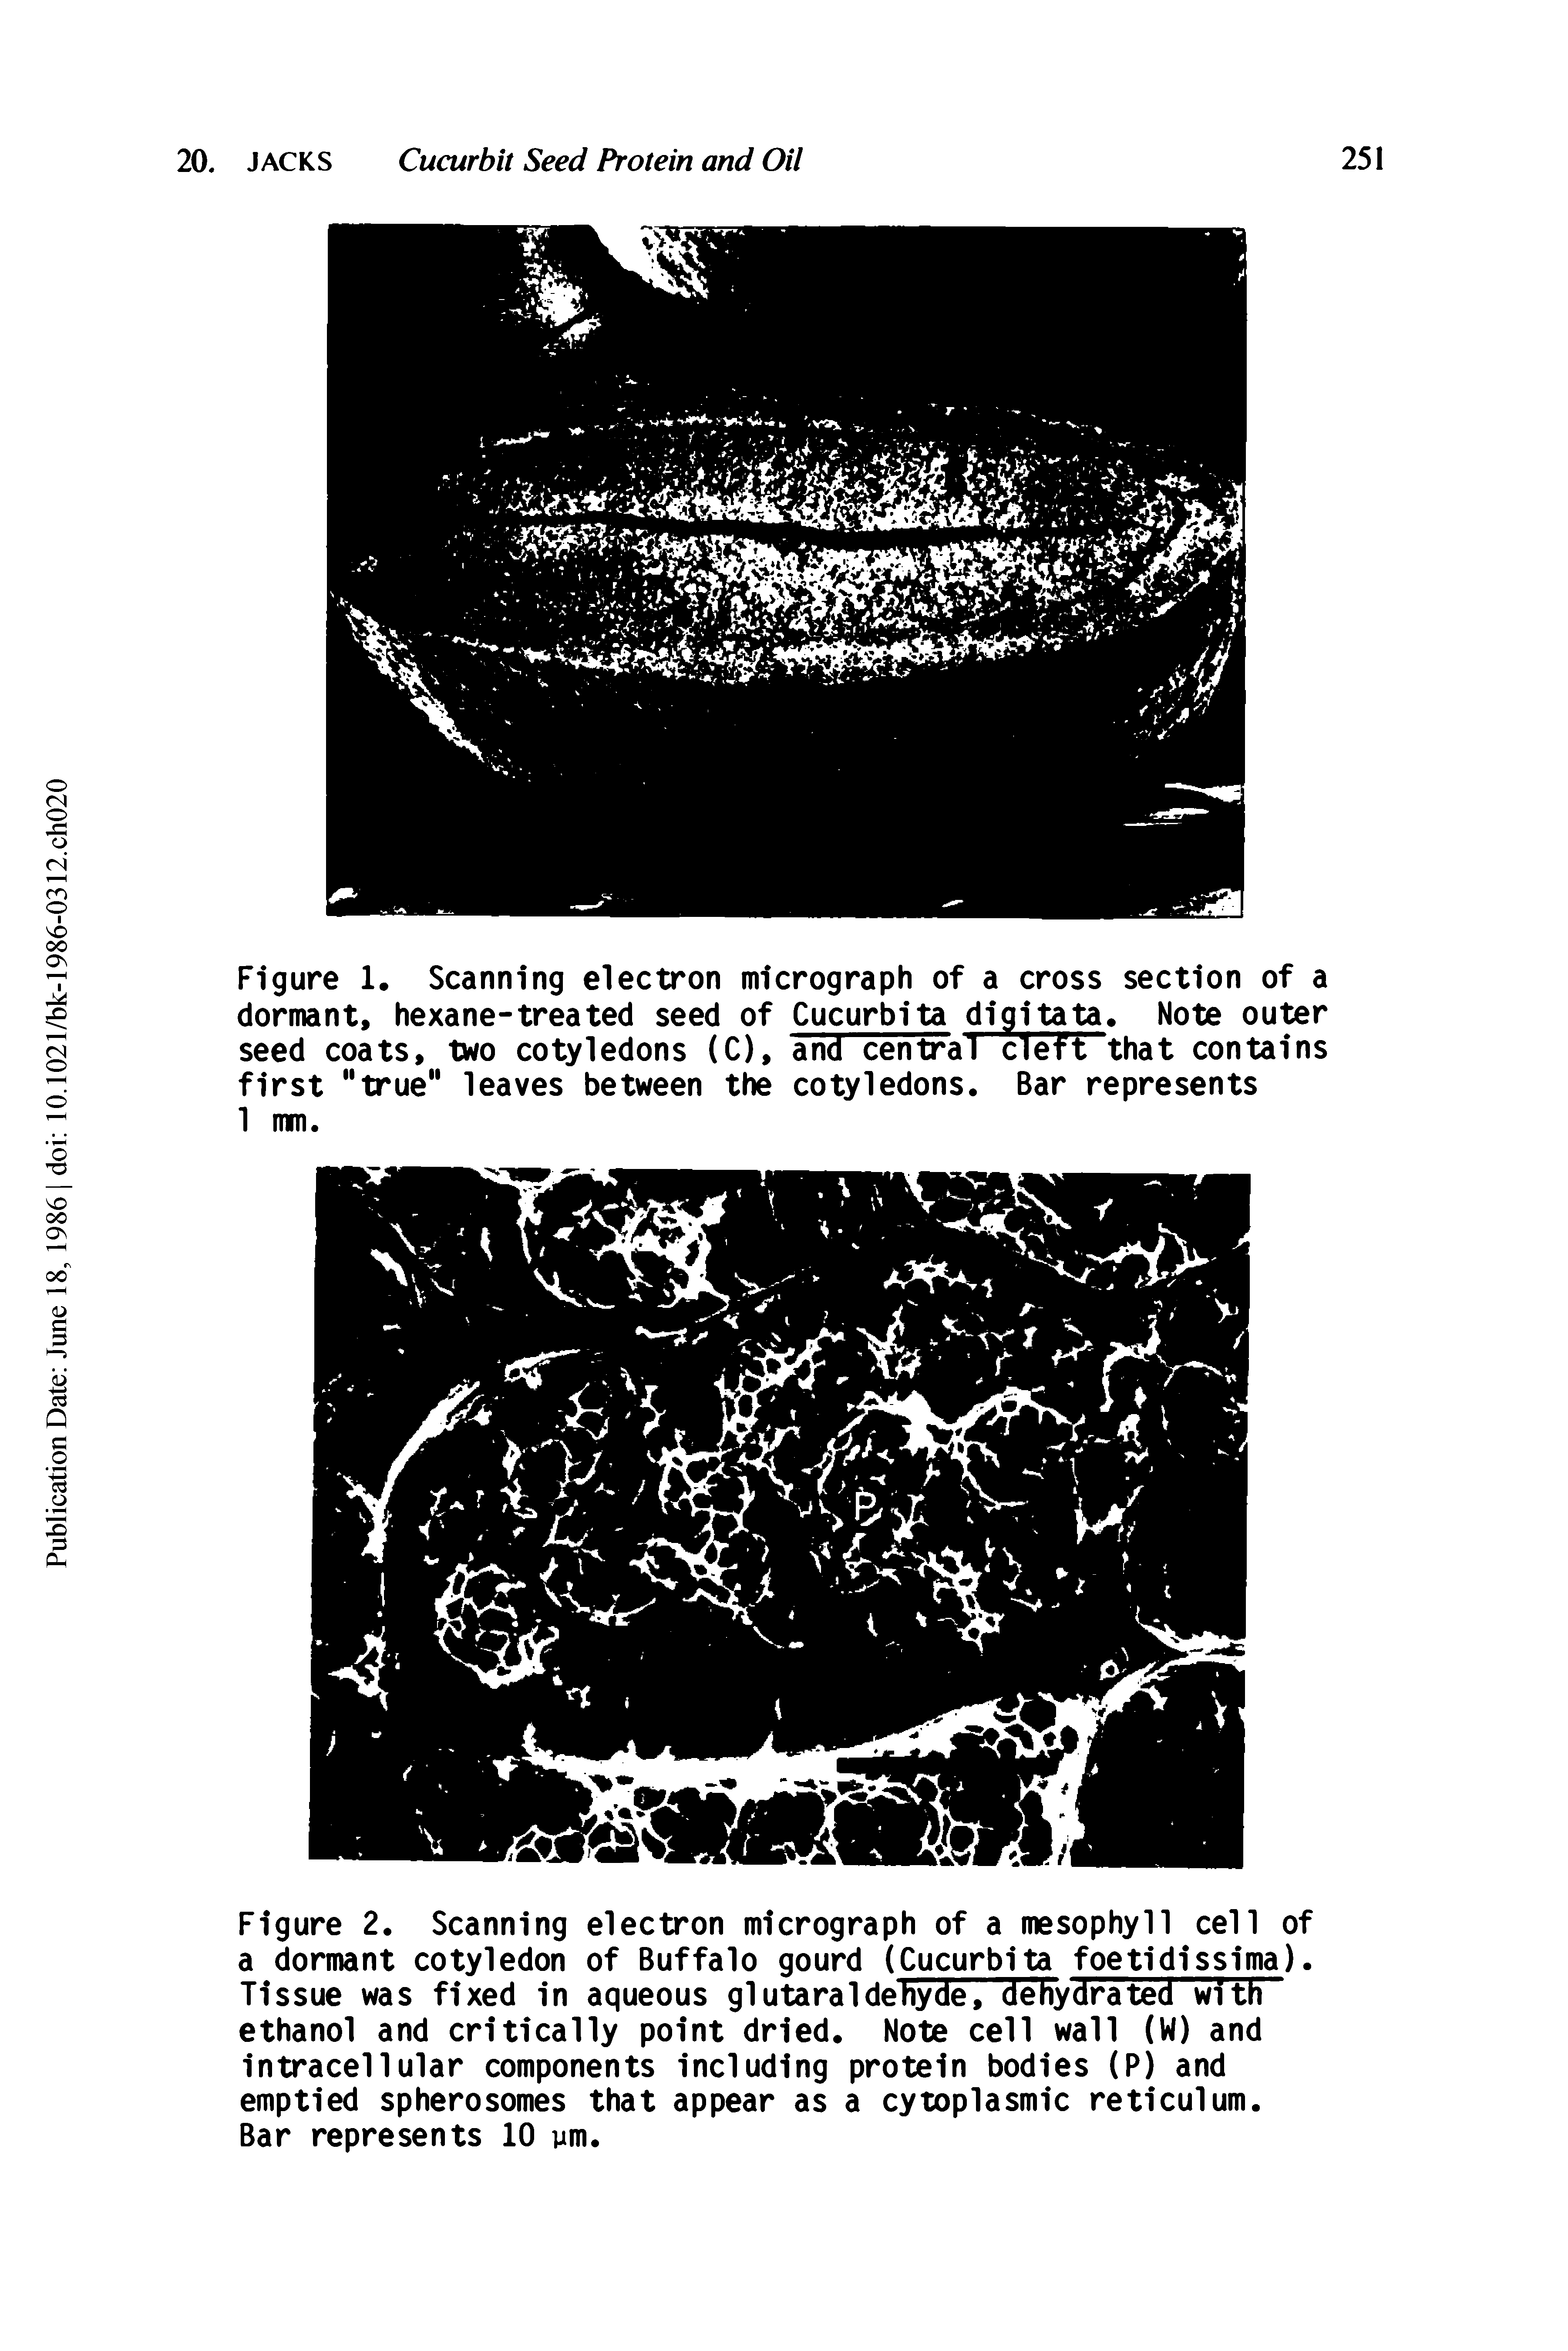 Figure 2. Scanning electron micrograph of a mesophyll cell of a dormant cotyledon of Buffalo gourd (Cucurbita foetidissima). Tissue was fixed in aqueous glutaraldehyde, dehydrated with ethanol and critically point dried. Note cell wall (W) and intracellular components including protein bodies (P) and emptied spherosomes that appear as a cytoplasmic reticulum.